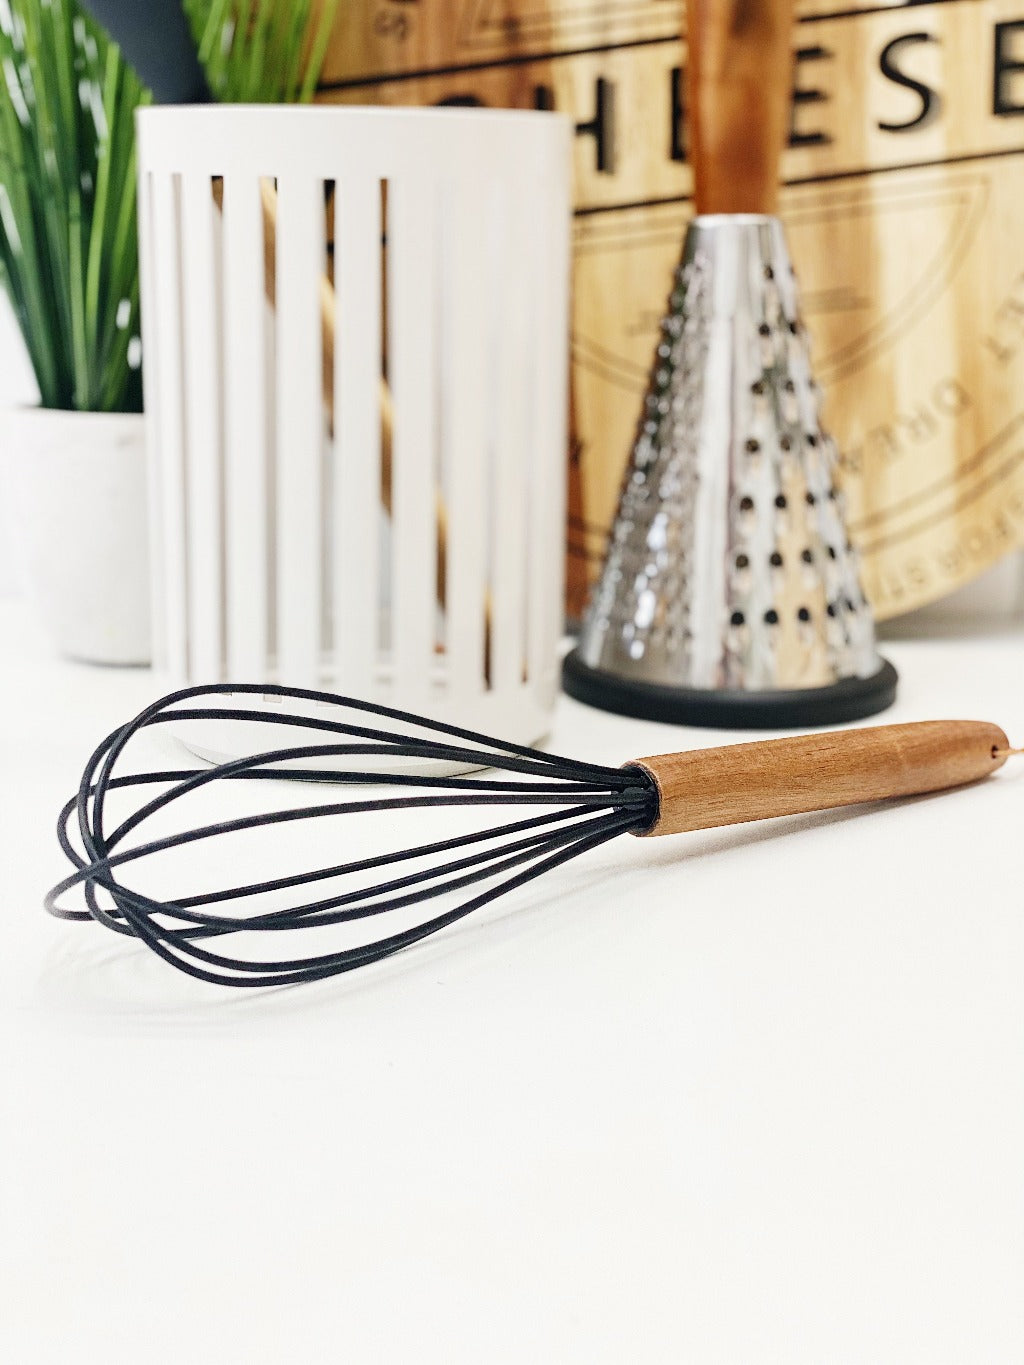 Bialetti St Clare Acacia Handle Silicone Whisk - Kitchen Utensils - black silicone head - heat resistant up to 500degrees - solid acacia handle |Bliss Gifts &amp; Homewares - Unit 8, 259 Princes Hwy Ulladulla - Shop Online &amp; In store - 0427795959, 44541523 - Australia wide shipping